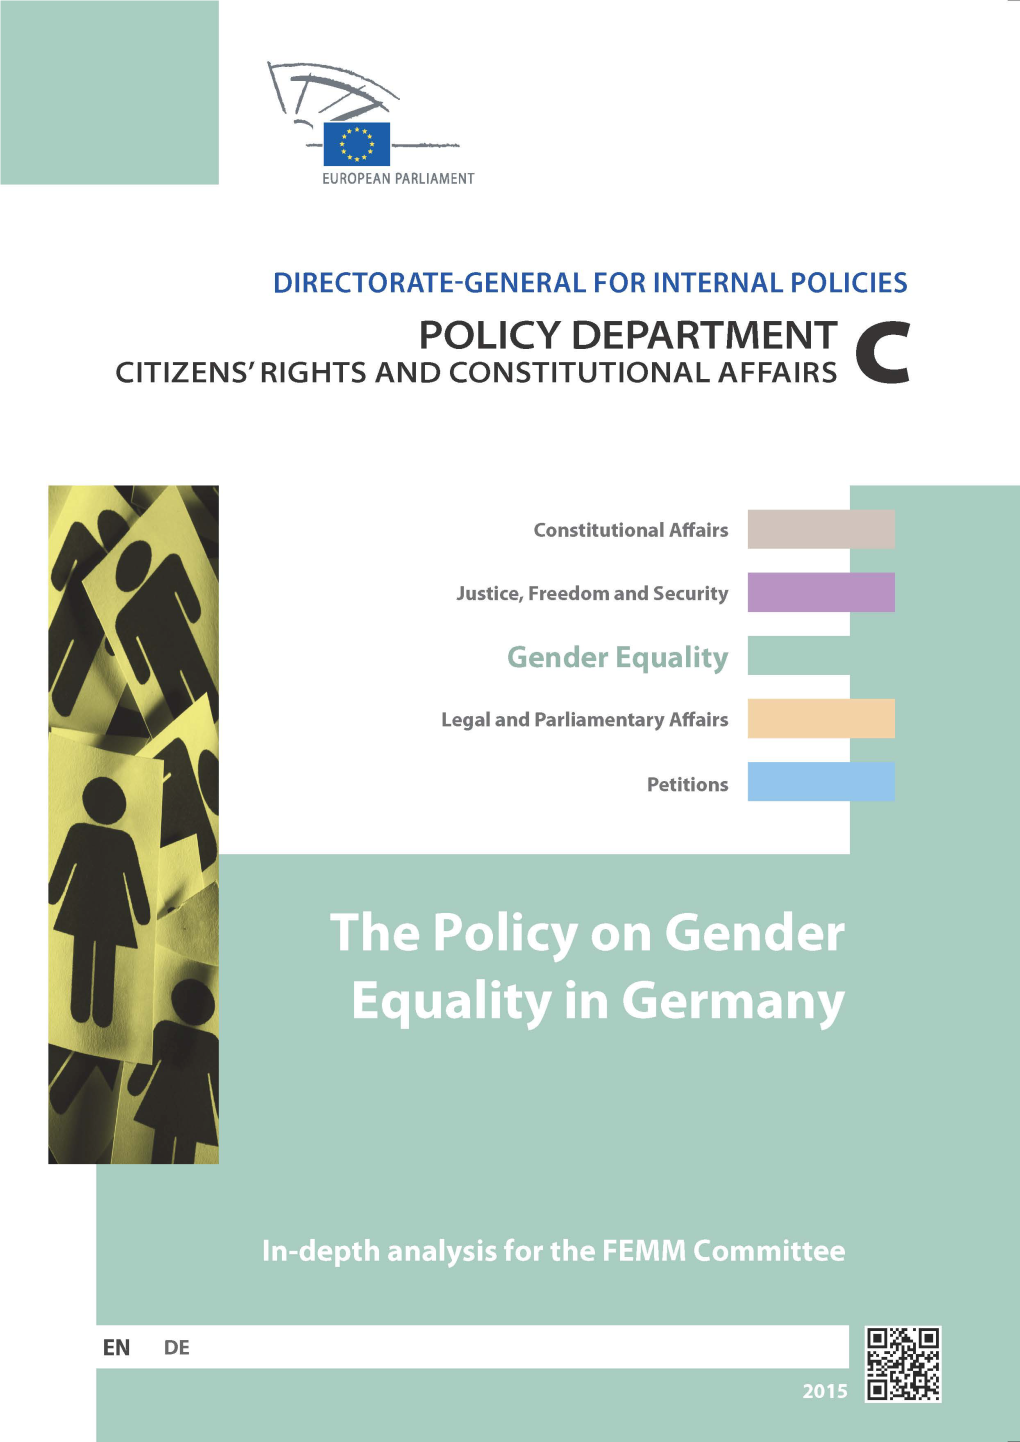 The Policy on Gender Equality in Germany